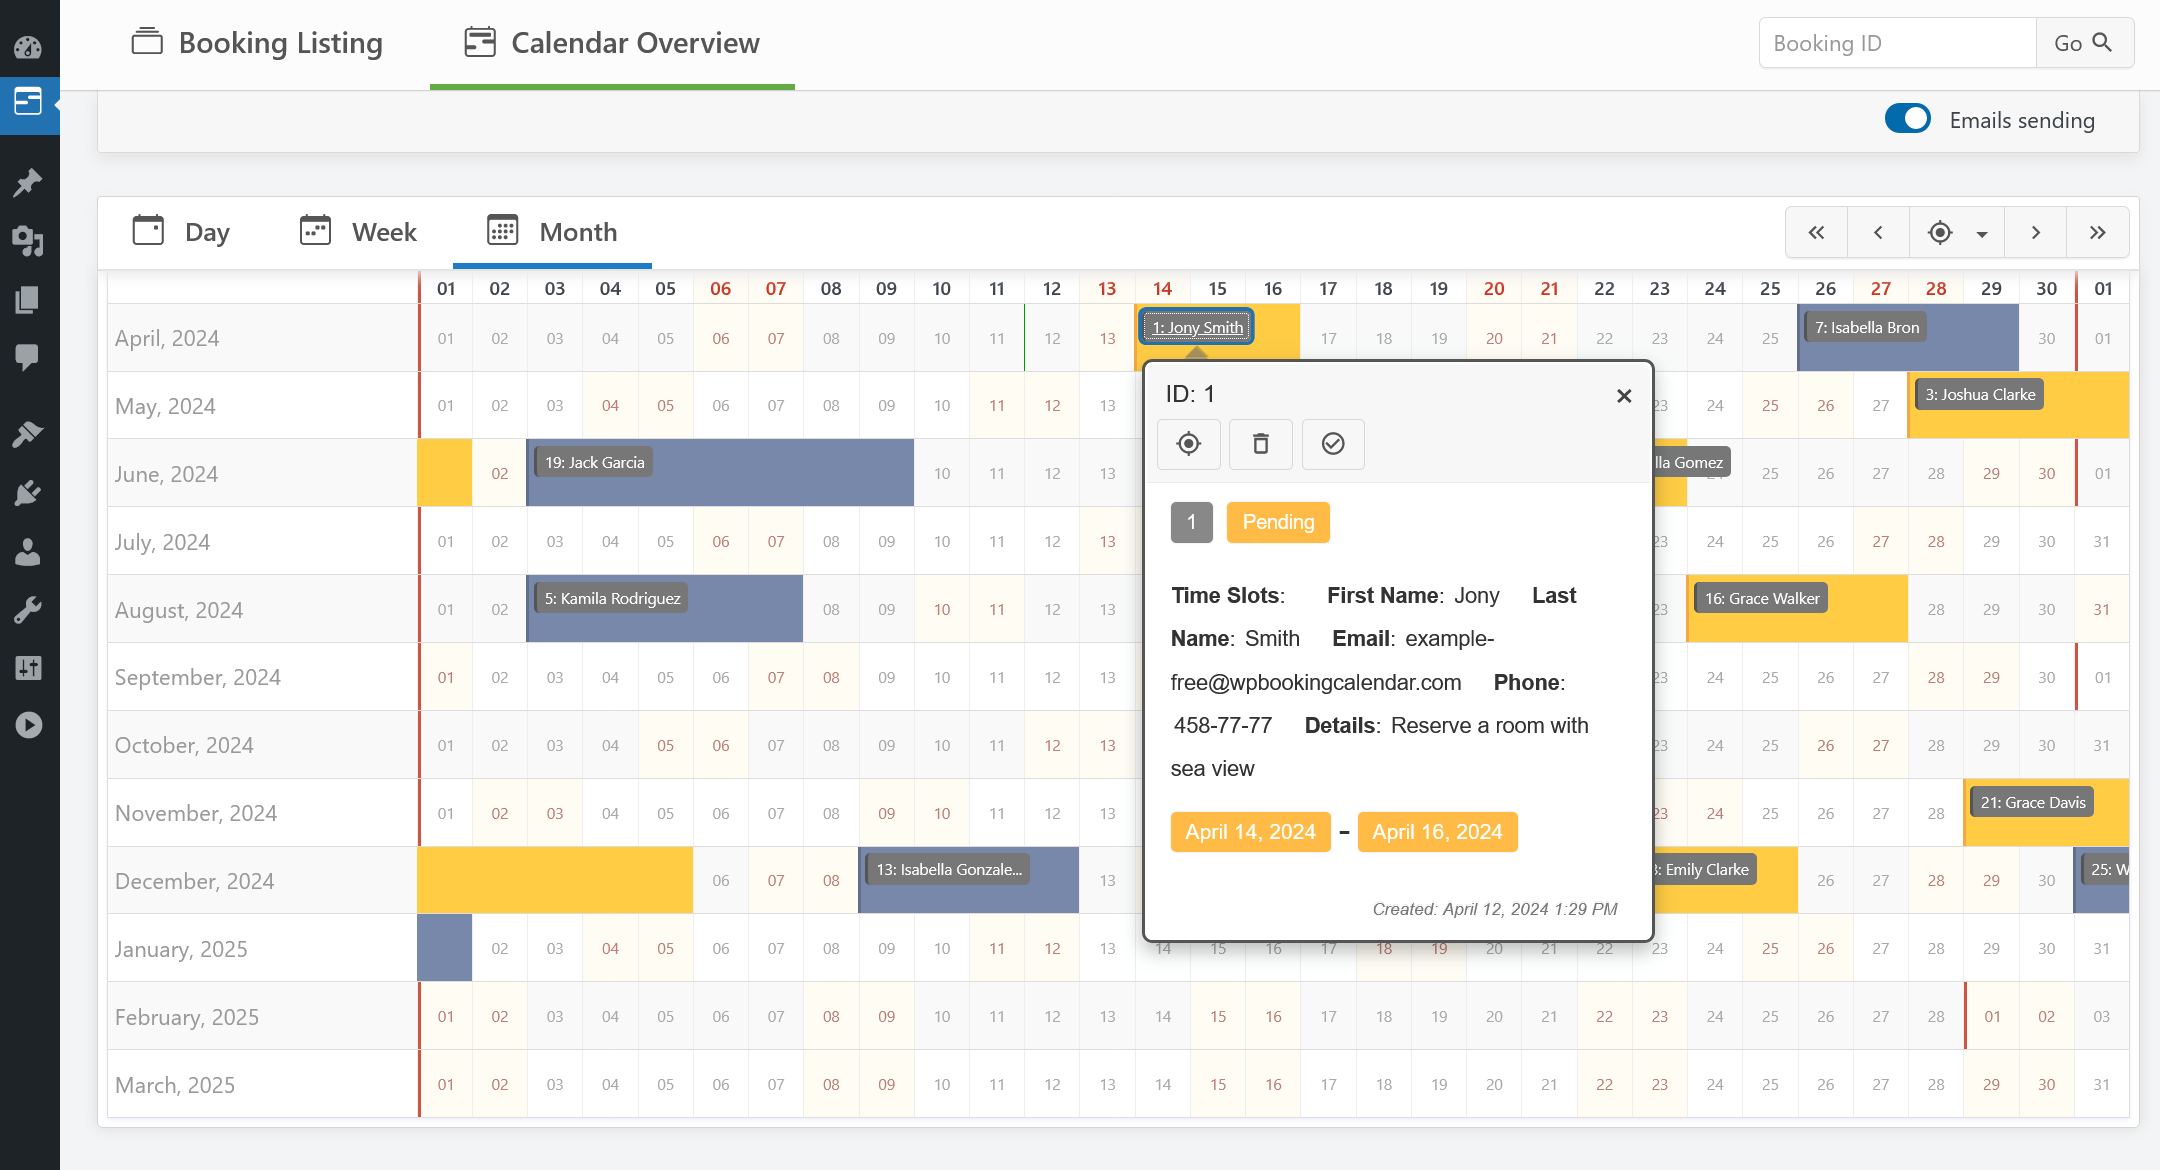 **Calendar Overview**: Get a clear overview of all your bookings.